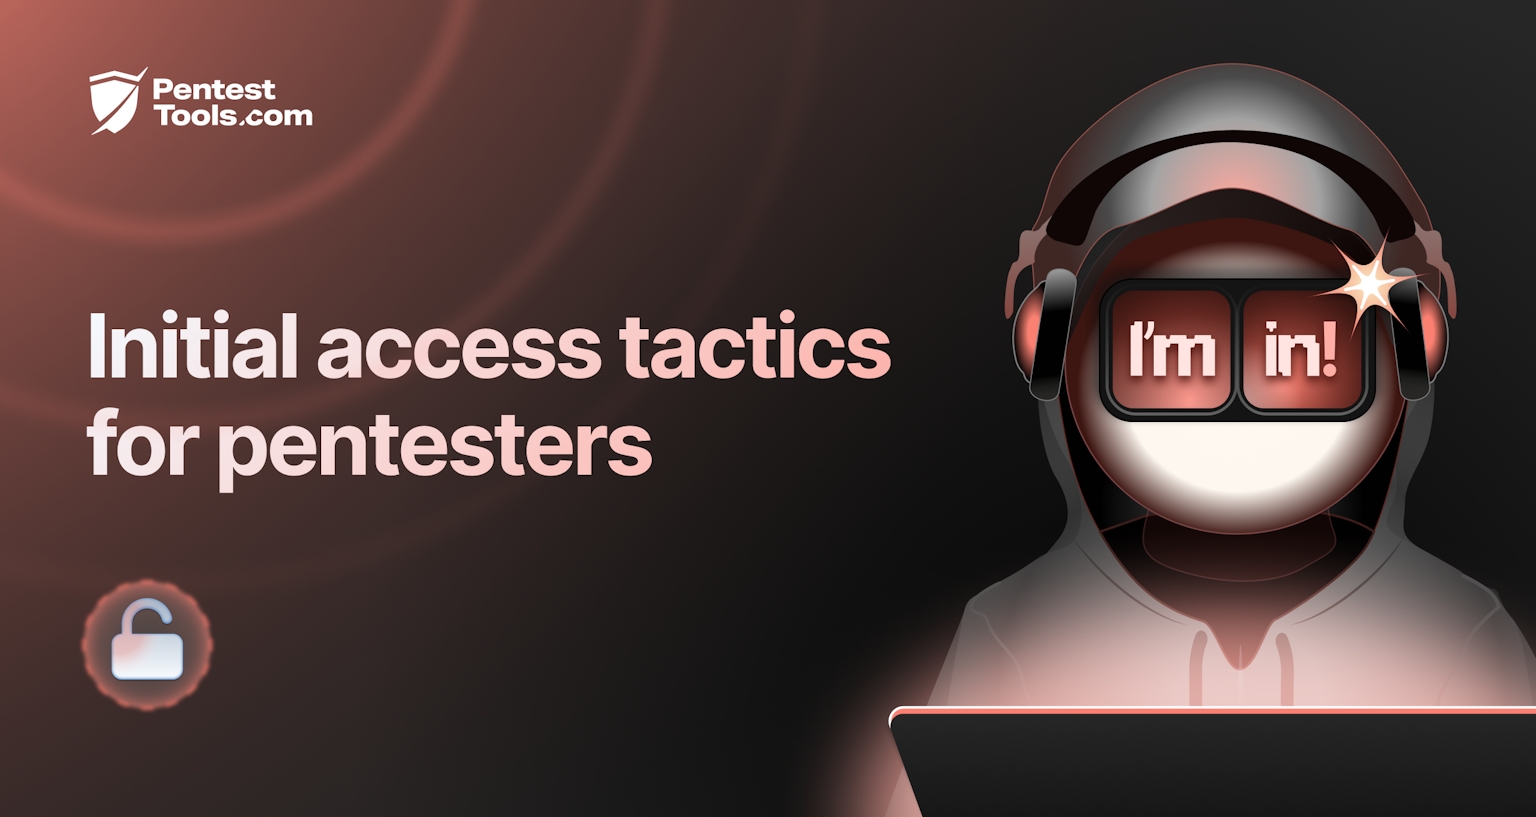 Read the article titled 3 initial access tactics to simulate in your penetration tests